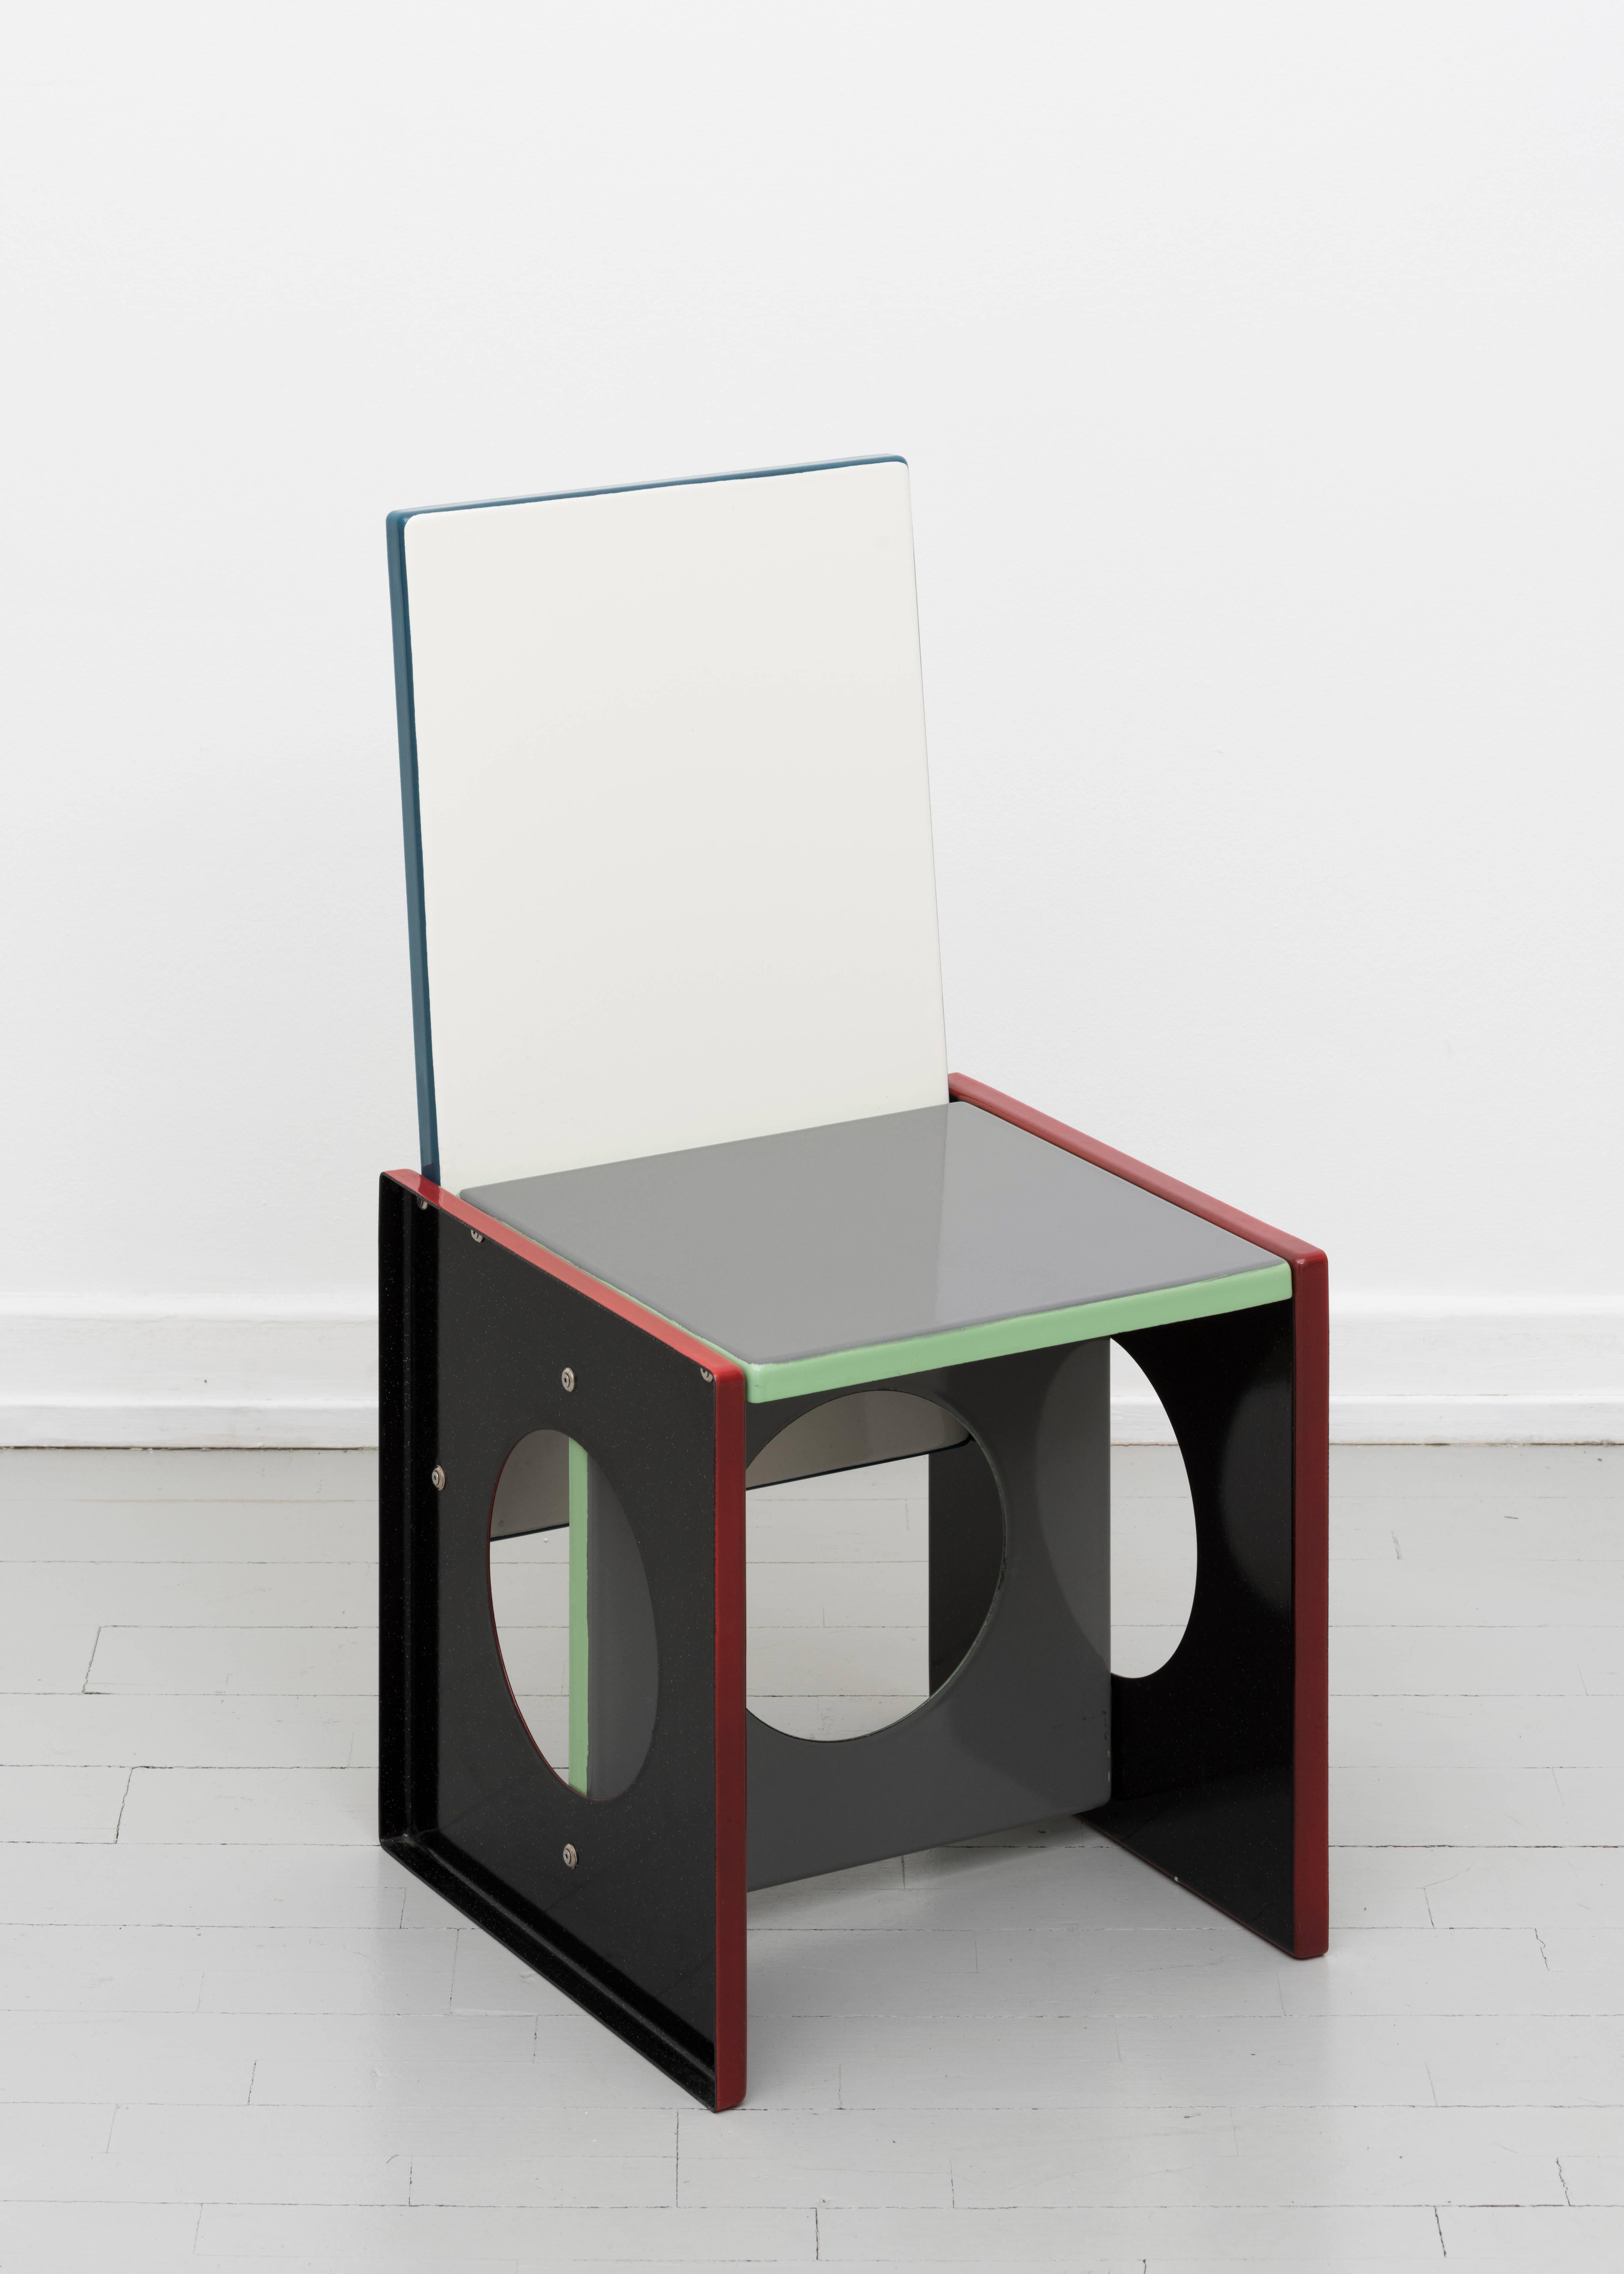 Eindruck chair by Silo Studio, from the exhibition 